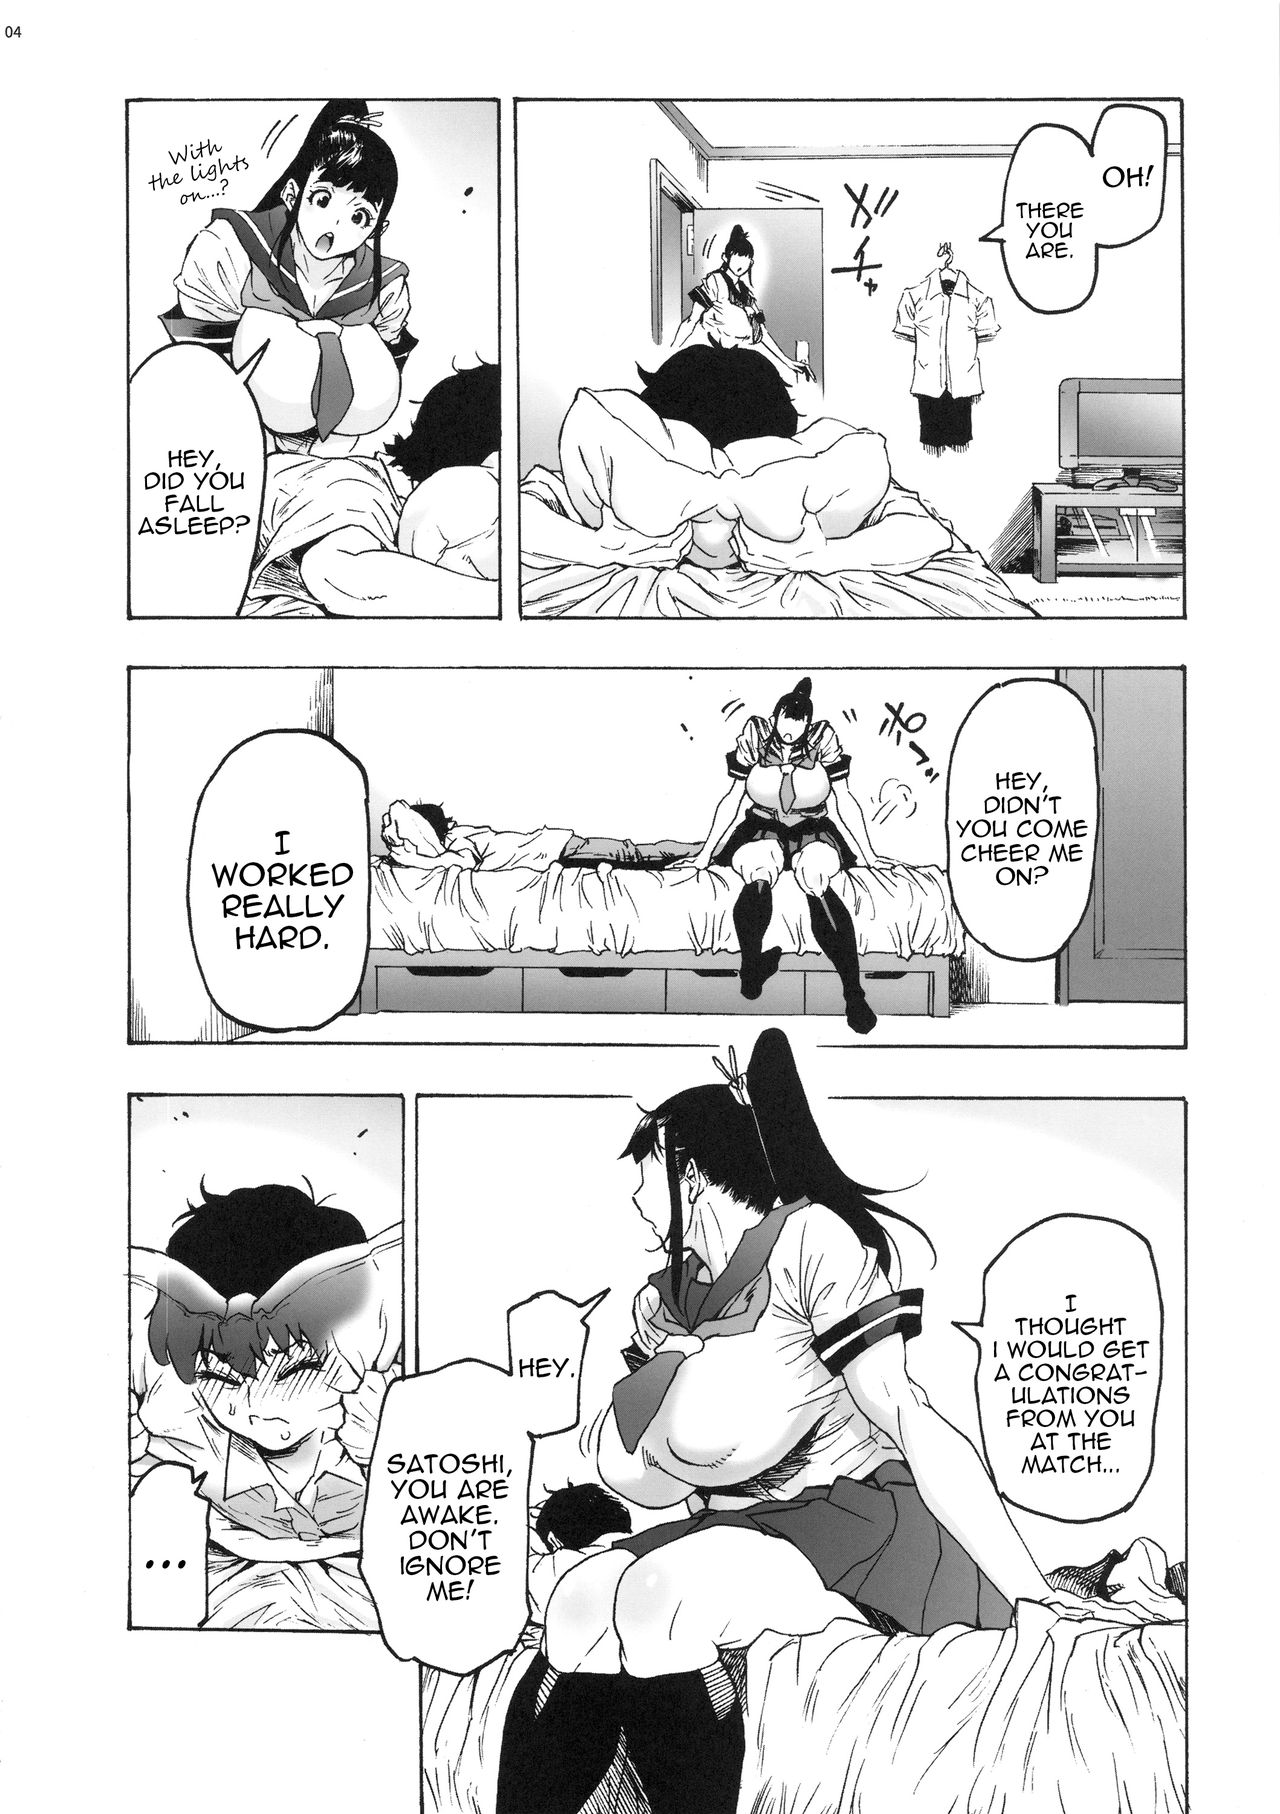 [Coochy-Coo (Bonten)] My Childhood friend is a JK Ponytailed Girl | With Aki-Nee 2 | AkiAss 3 | Trilogy [English] {Stopittarpit} page 27 full